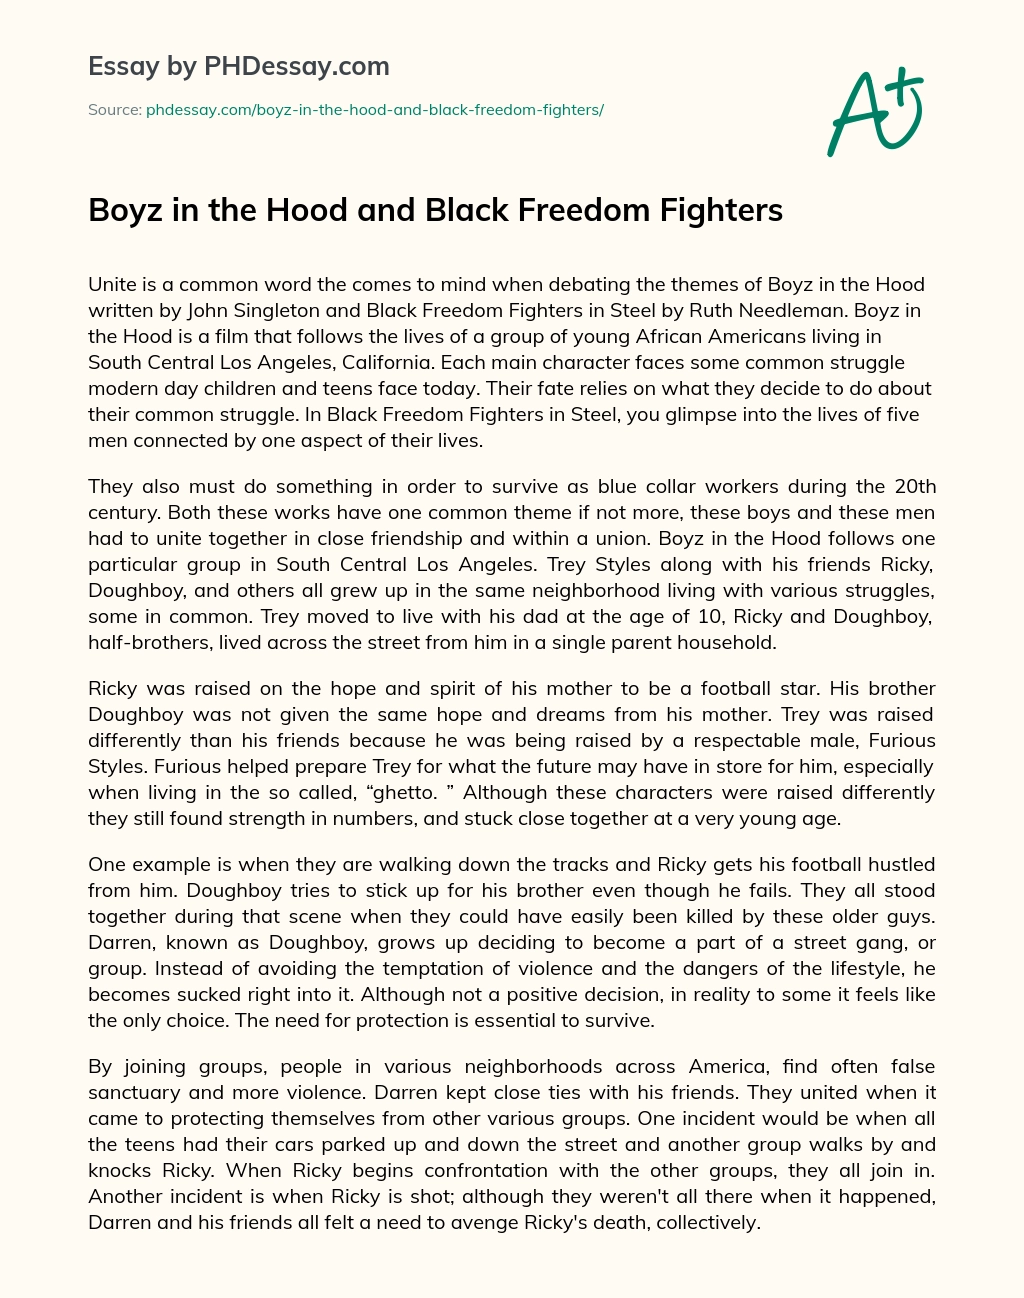 Boyz in the Hood and Black Freedom Fighters essay